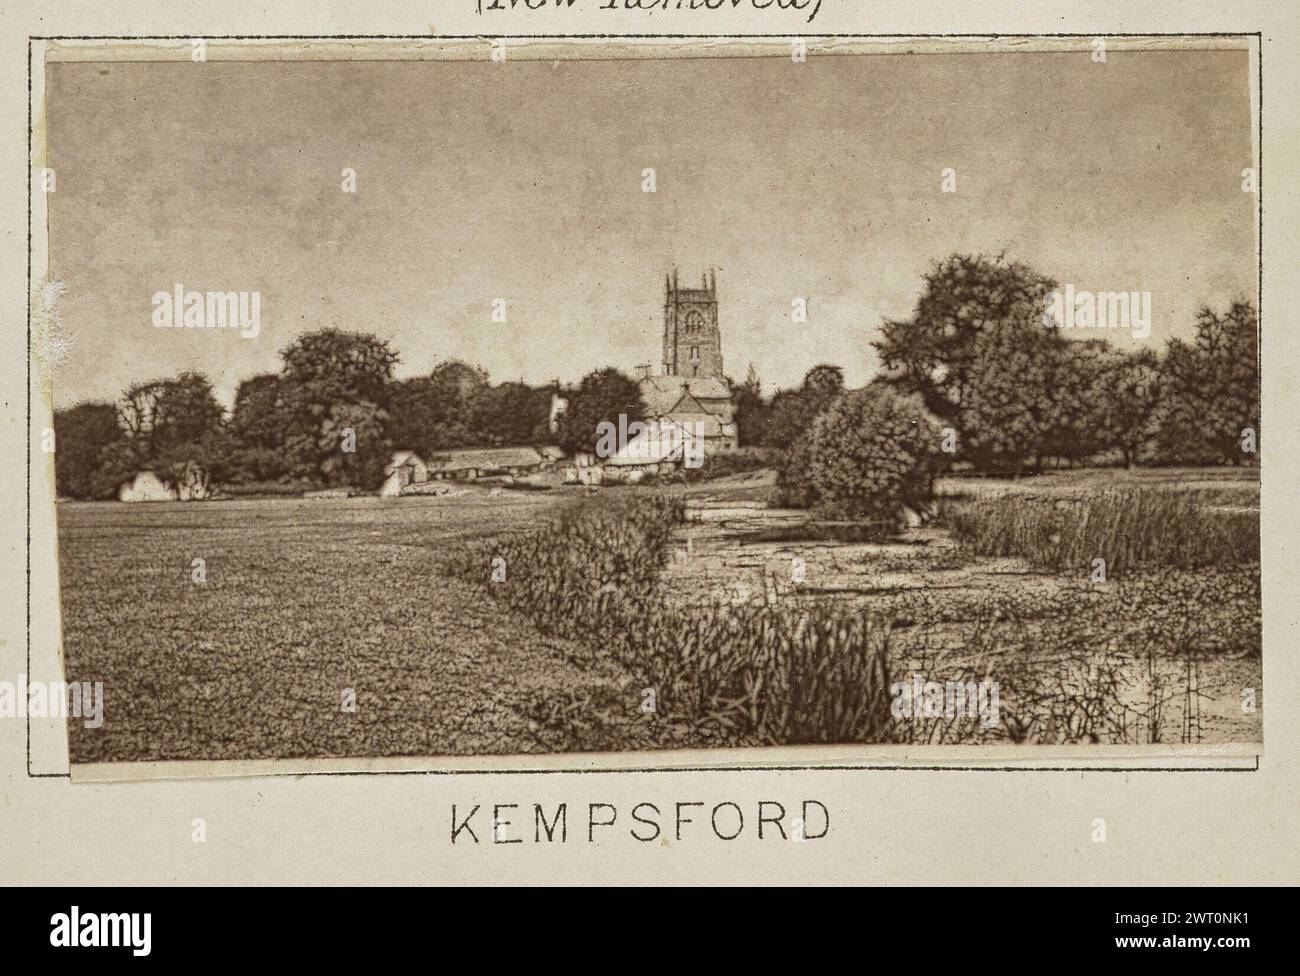 Kempsford. Henry W. Taunt, photographer (British, 1842 - 1922) about 1886 One of three tipped-in photographs illustrating a printed map of Castle Eaton, Kempsford, and the surrounding area along the River Thames. The photograph shows a view of the river at Kempsford with St. Mary's Church and the surrounding buildings visible across a field in the distance. (Recto, mount) lower center, below image, printed in black ink: 'KEMPSFORD' Stock Photo